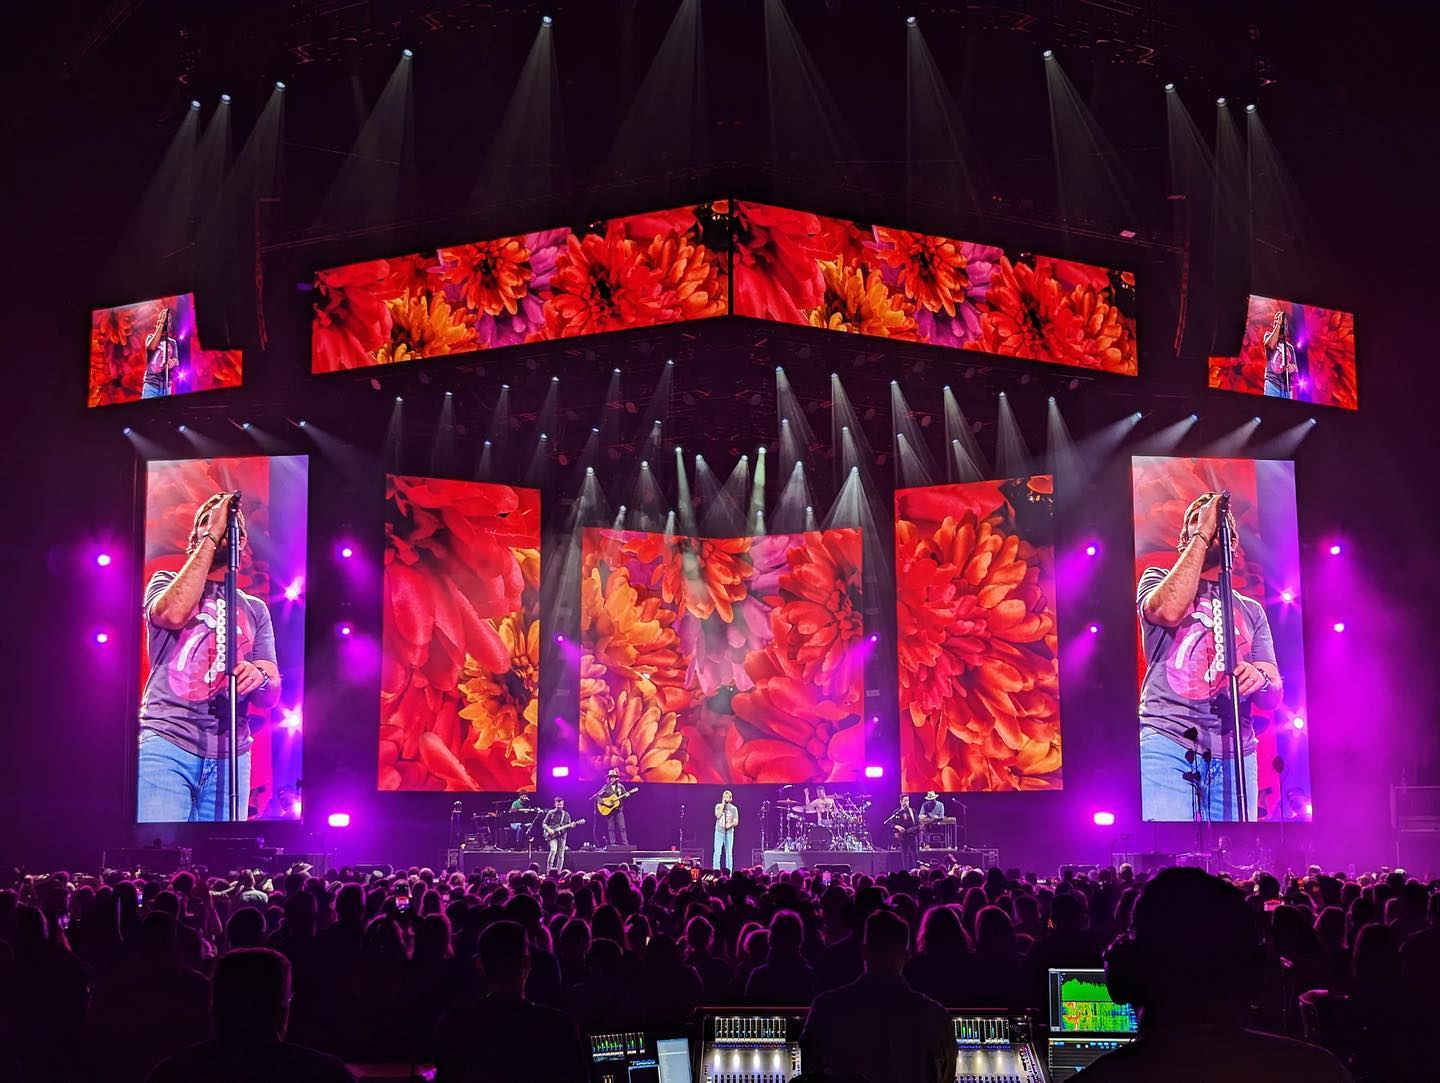 PRG UK was thrilled to be in the heart of the action once again this year, delivering lighting, rigging, LED, servers, and cameras to C2C’s London and Glasgow shows.